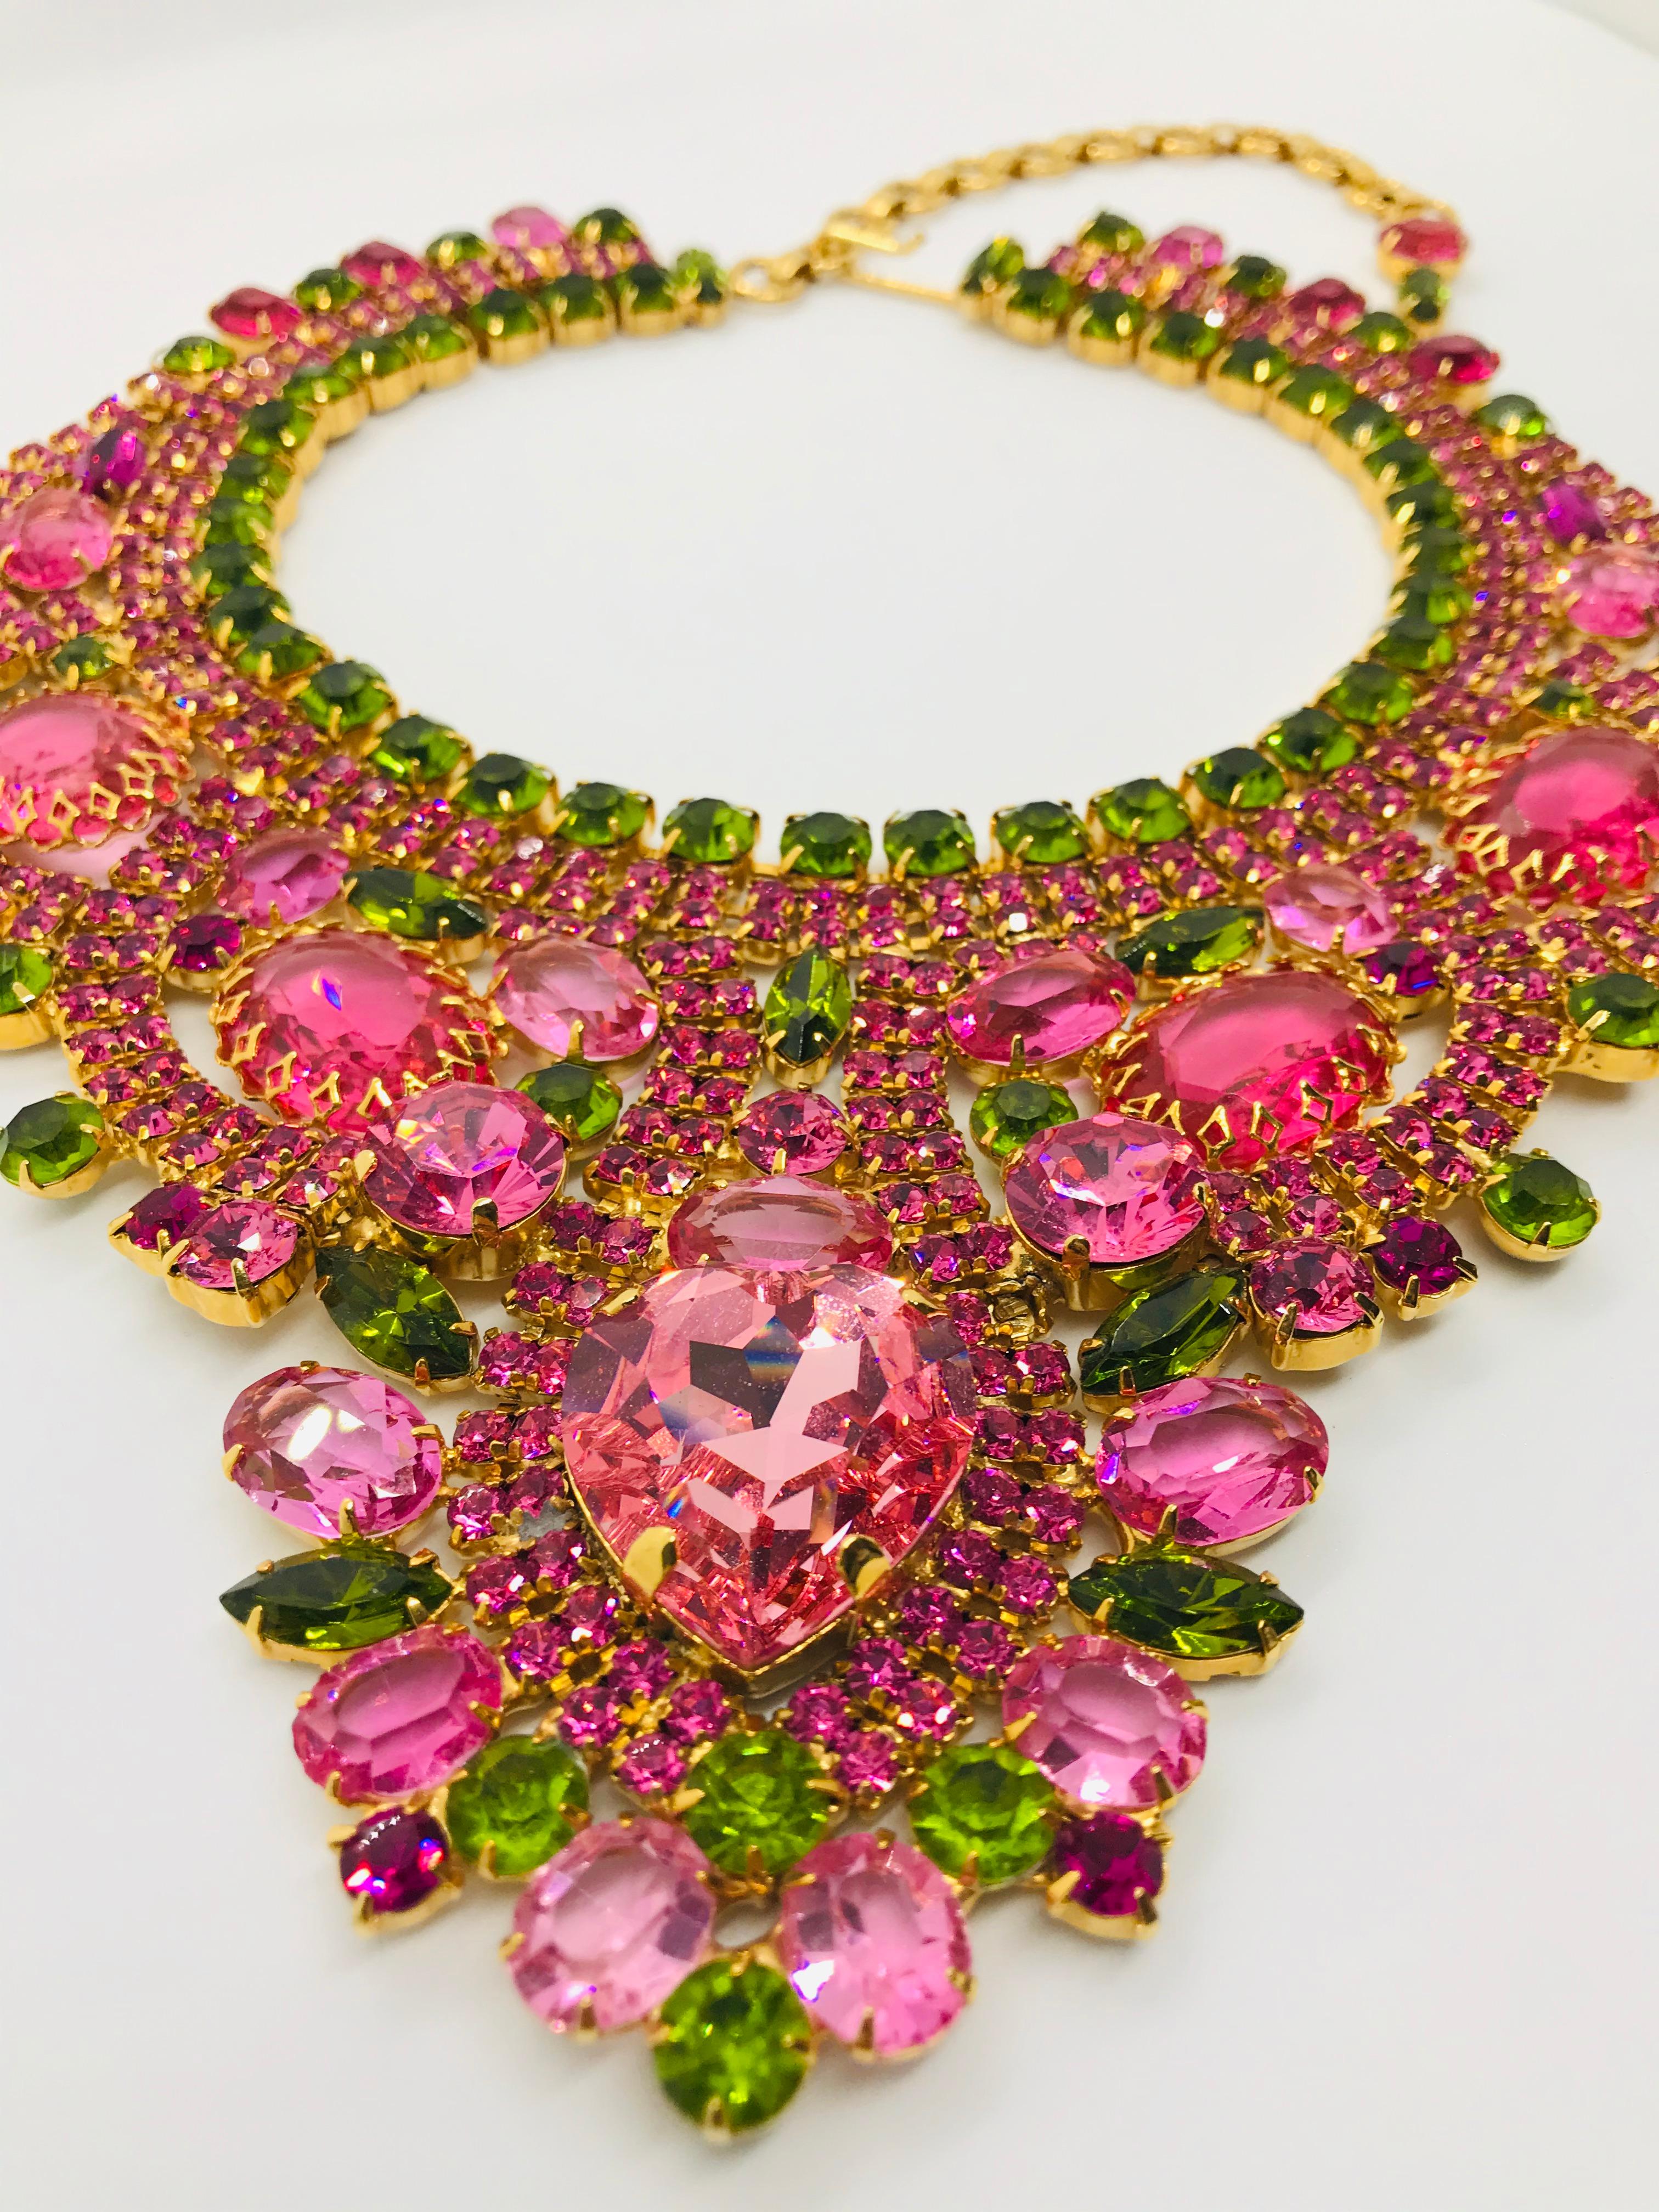 A great bib necklace transforms any outfit from the ordinary to the extraordinary!  Our rose and olivine vintage Swarovski crystal bib necklace features a heart shaped center stone with a mix of foiled and unfoiled crystals throughout the body of